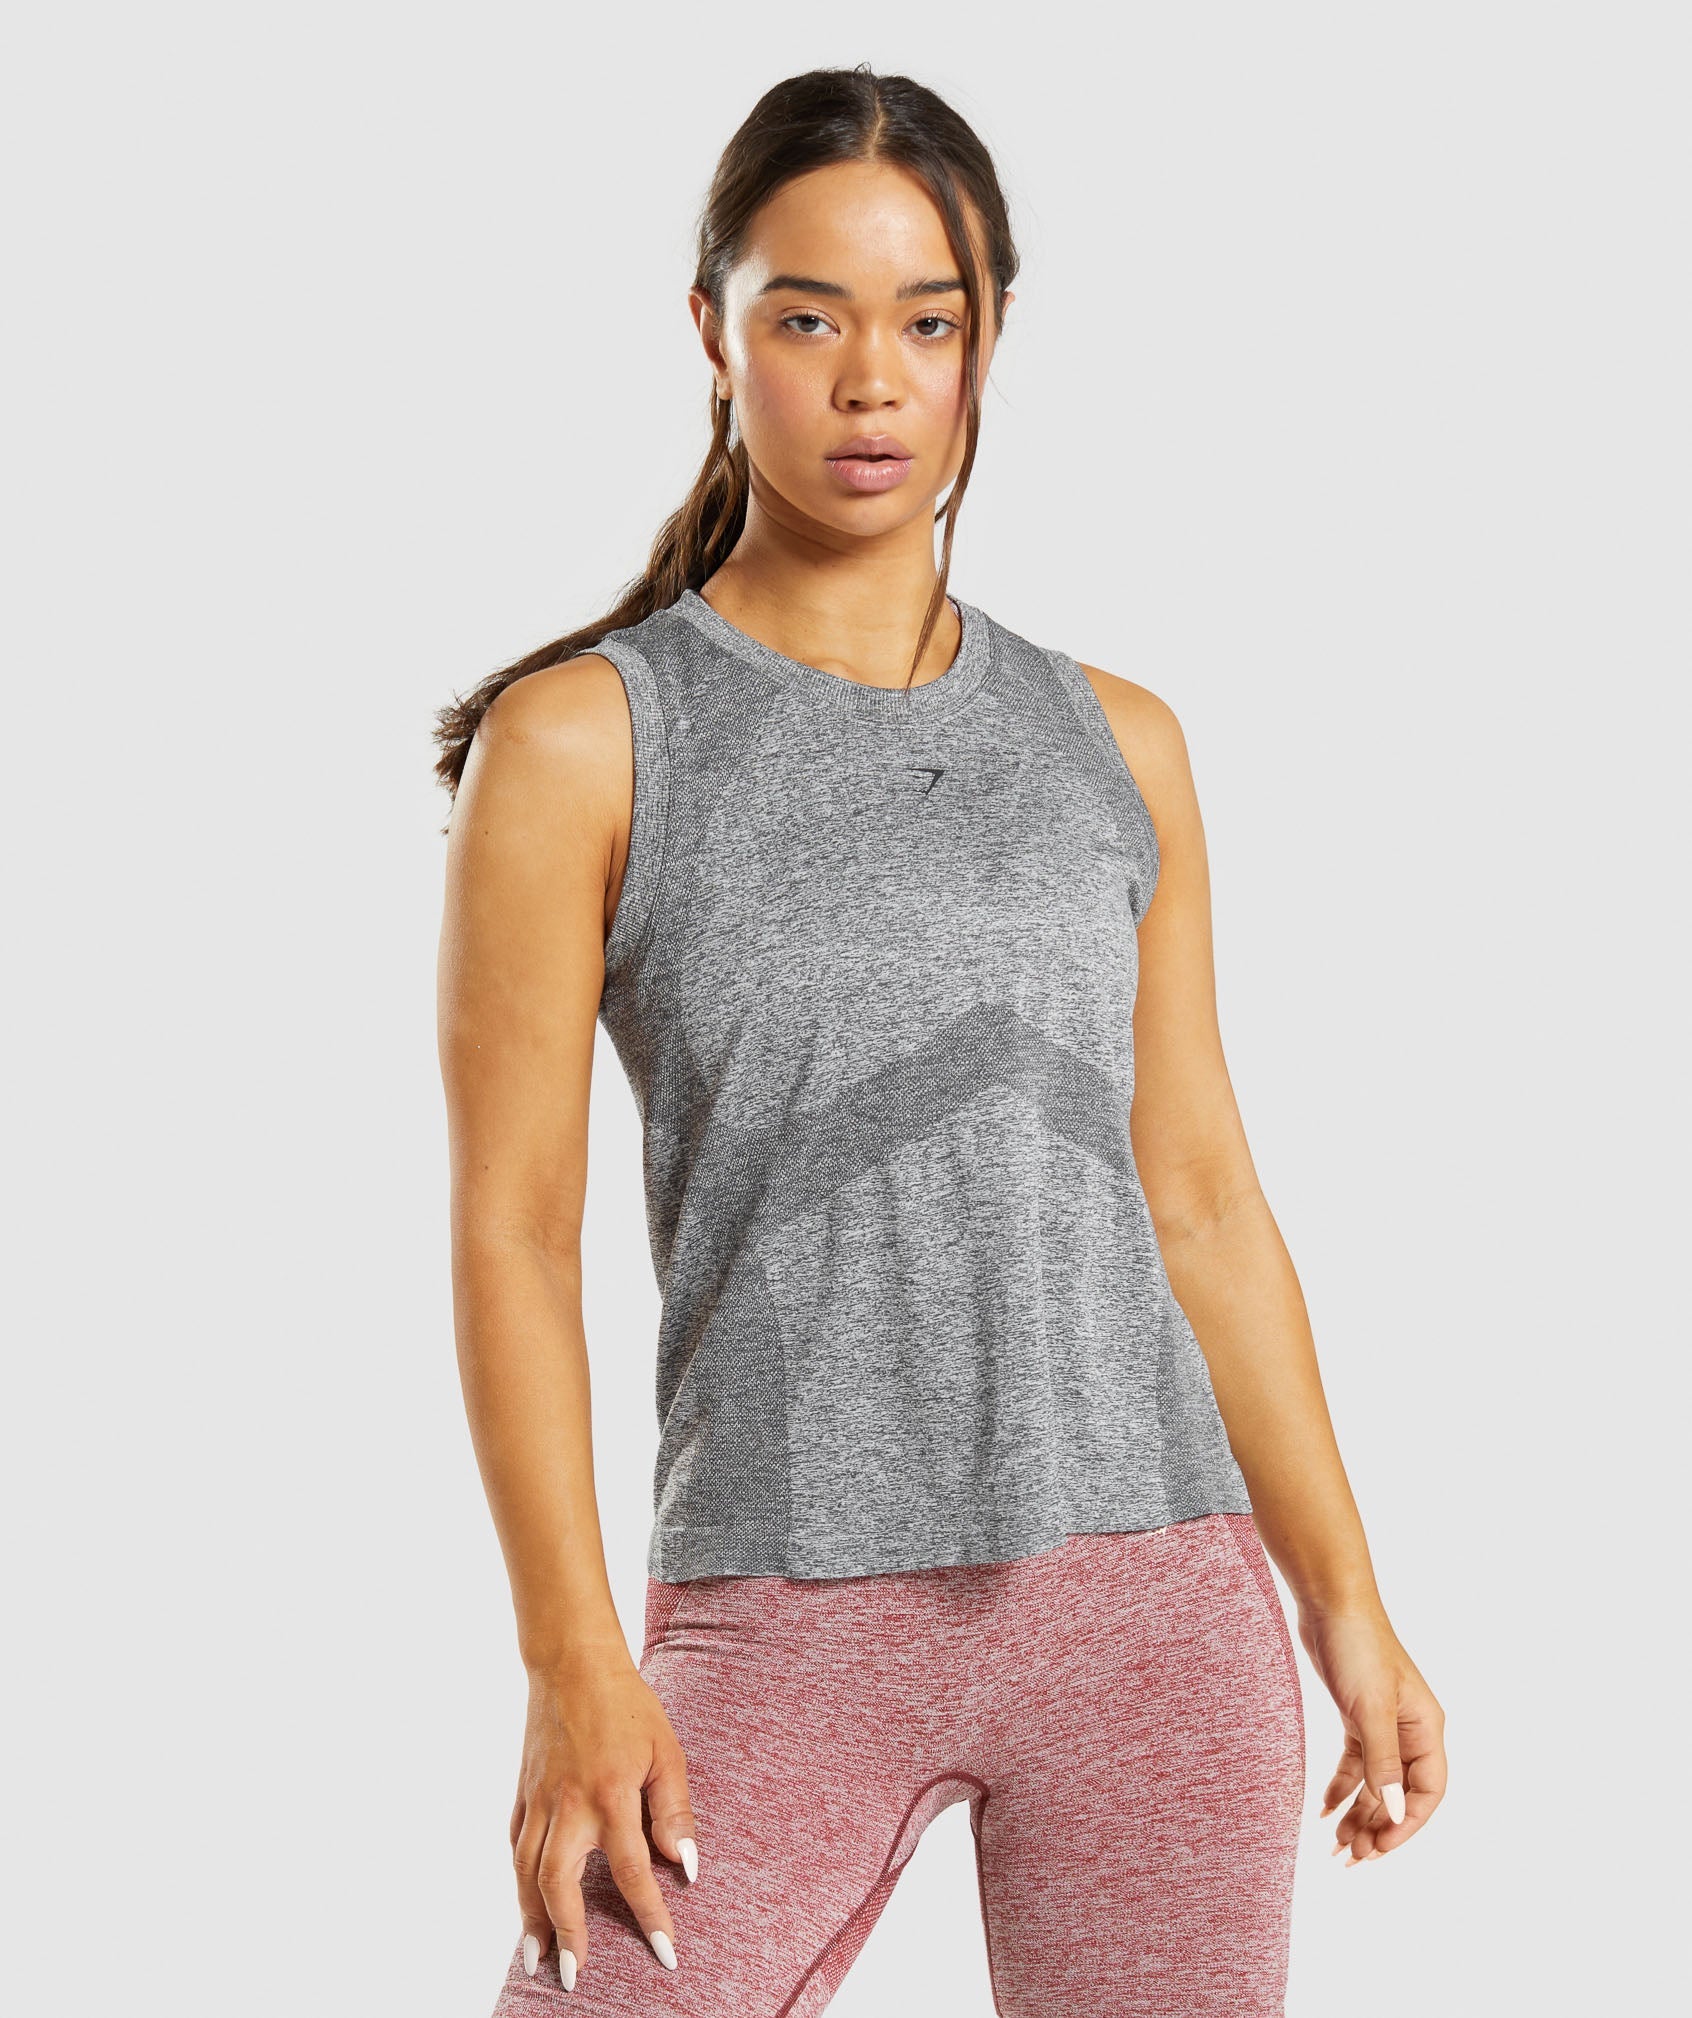 Flex Loose Tank Top in Charcoal Grey Marl - view 1